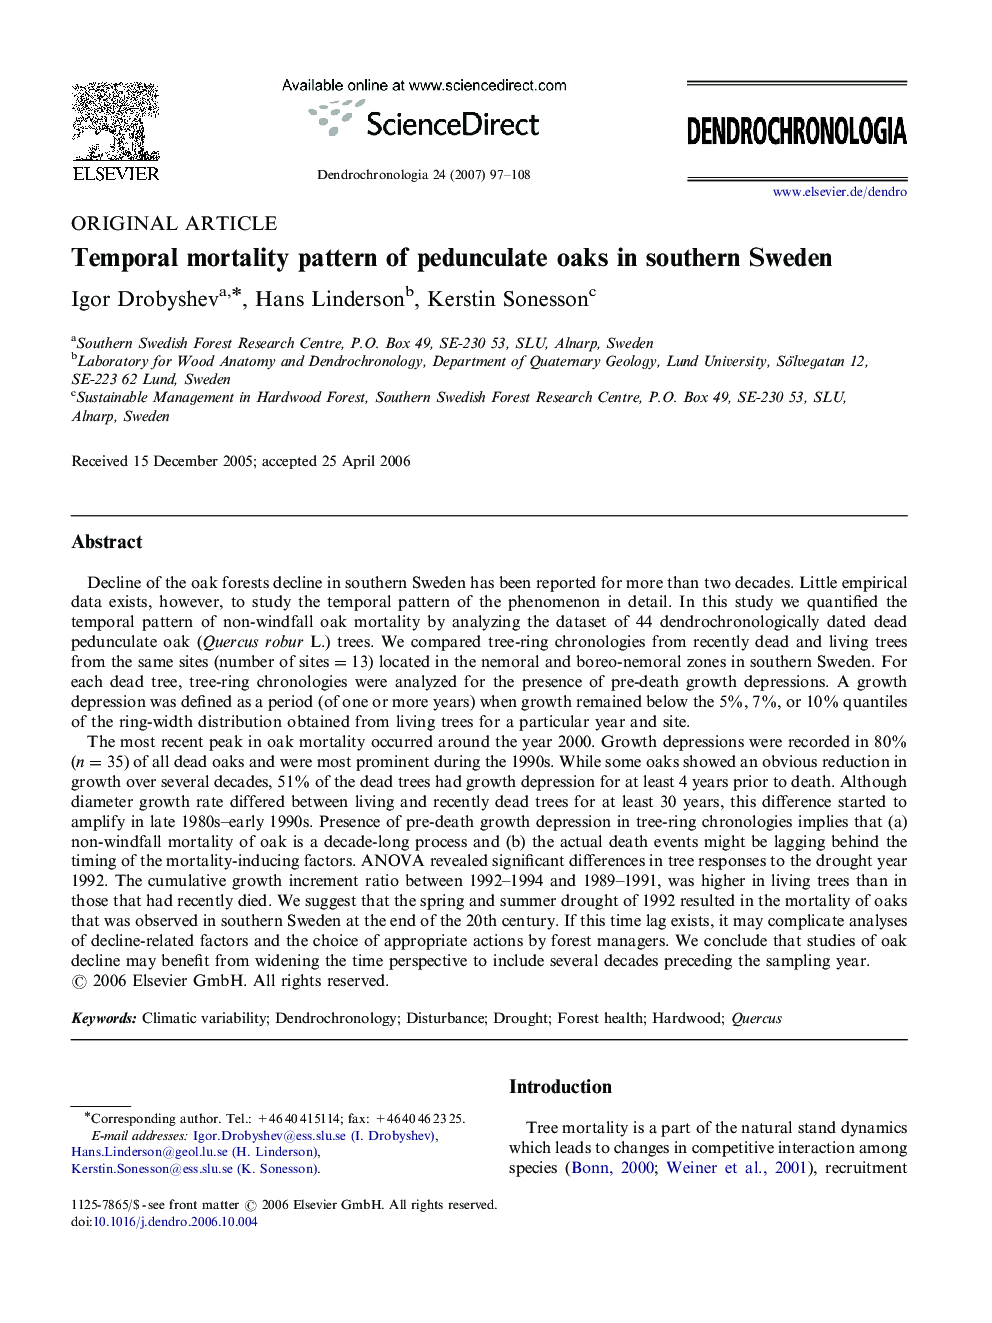 Temporal mortality pattern of pedunculate oaks in southern Sweden